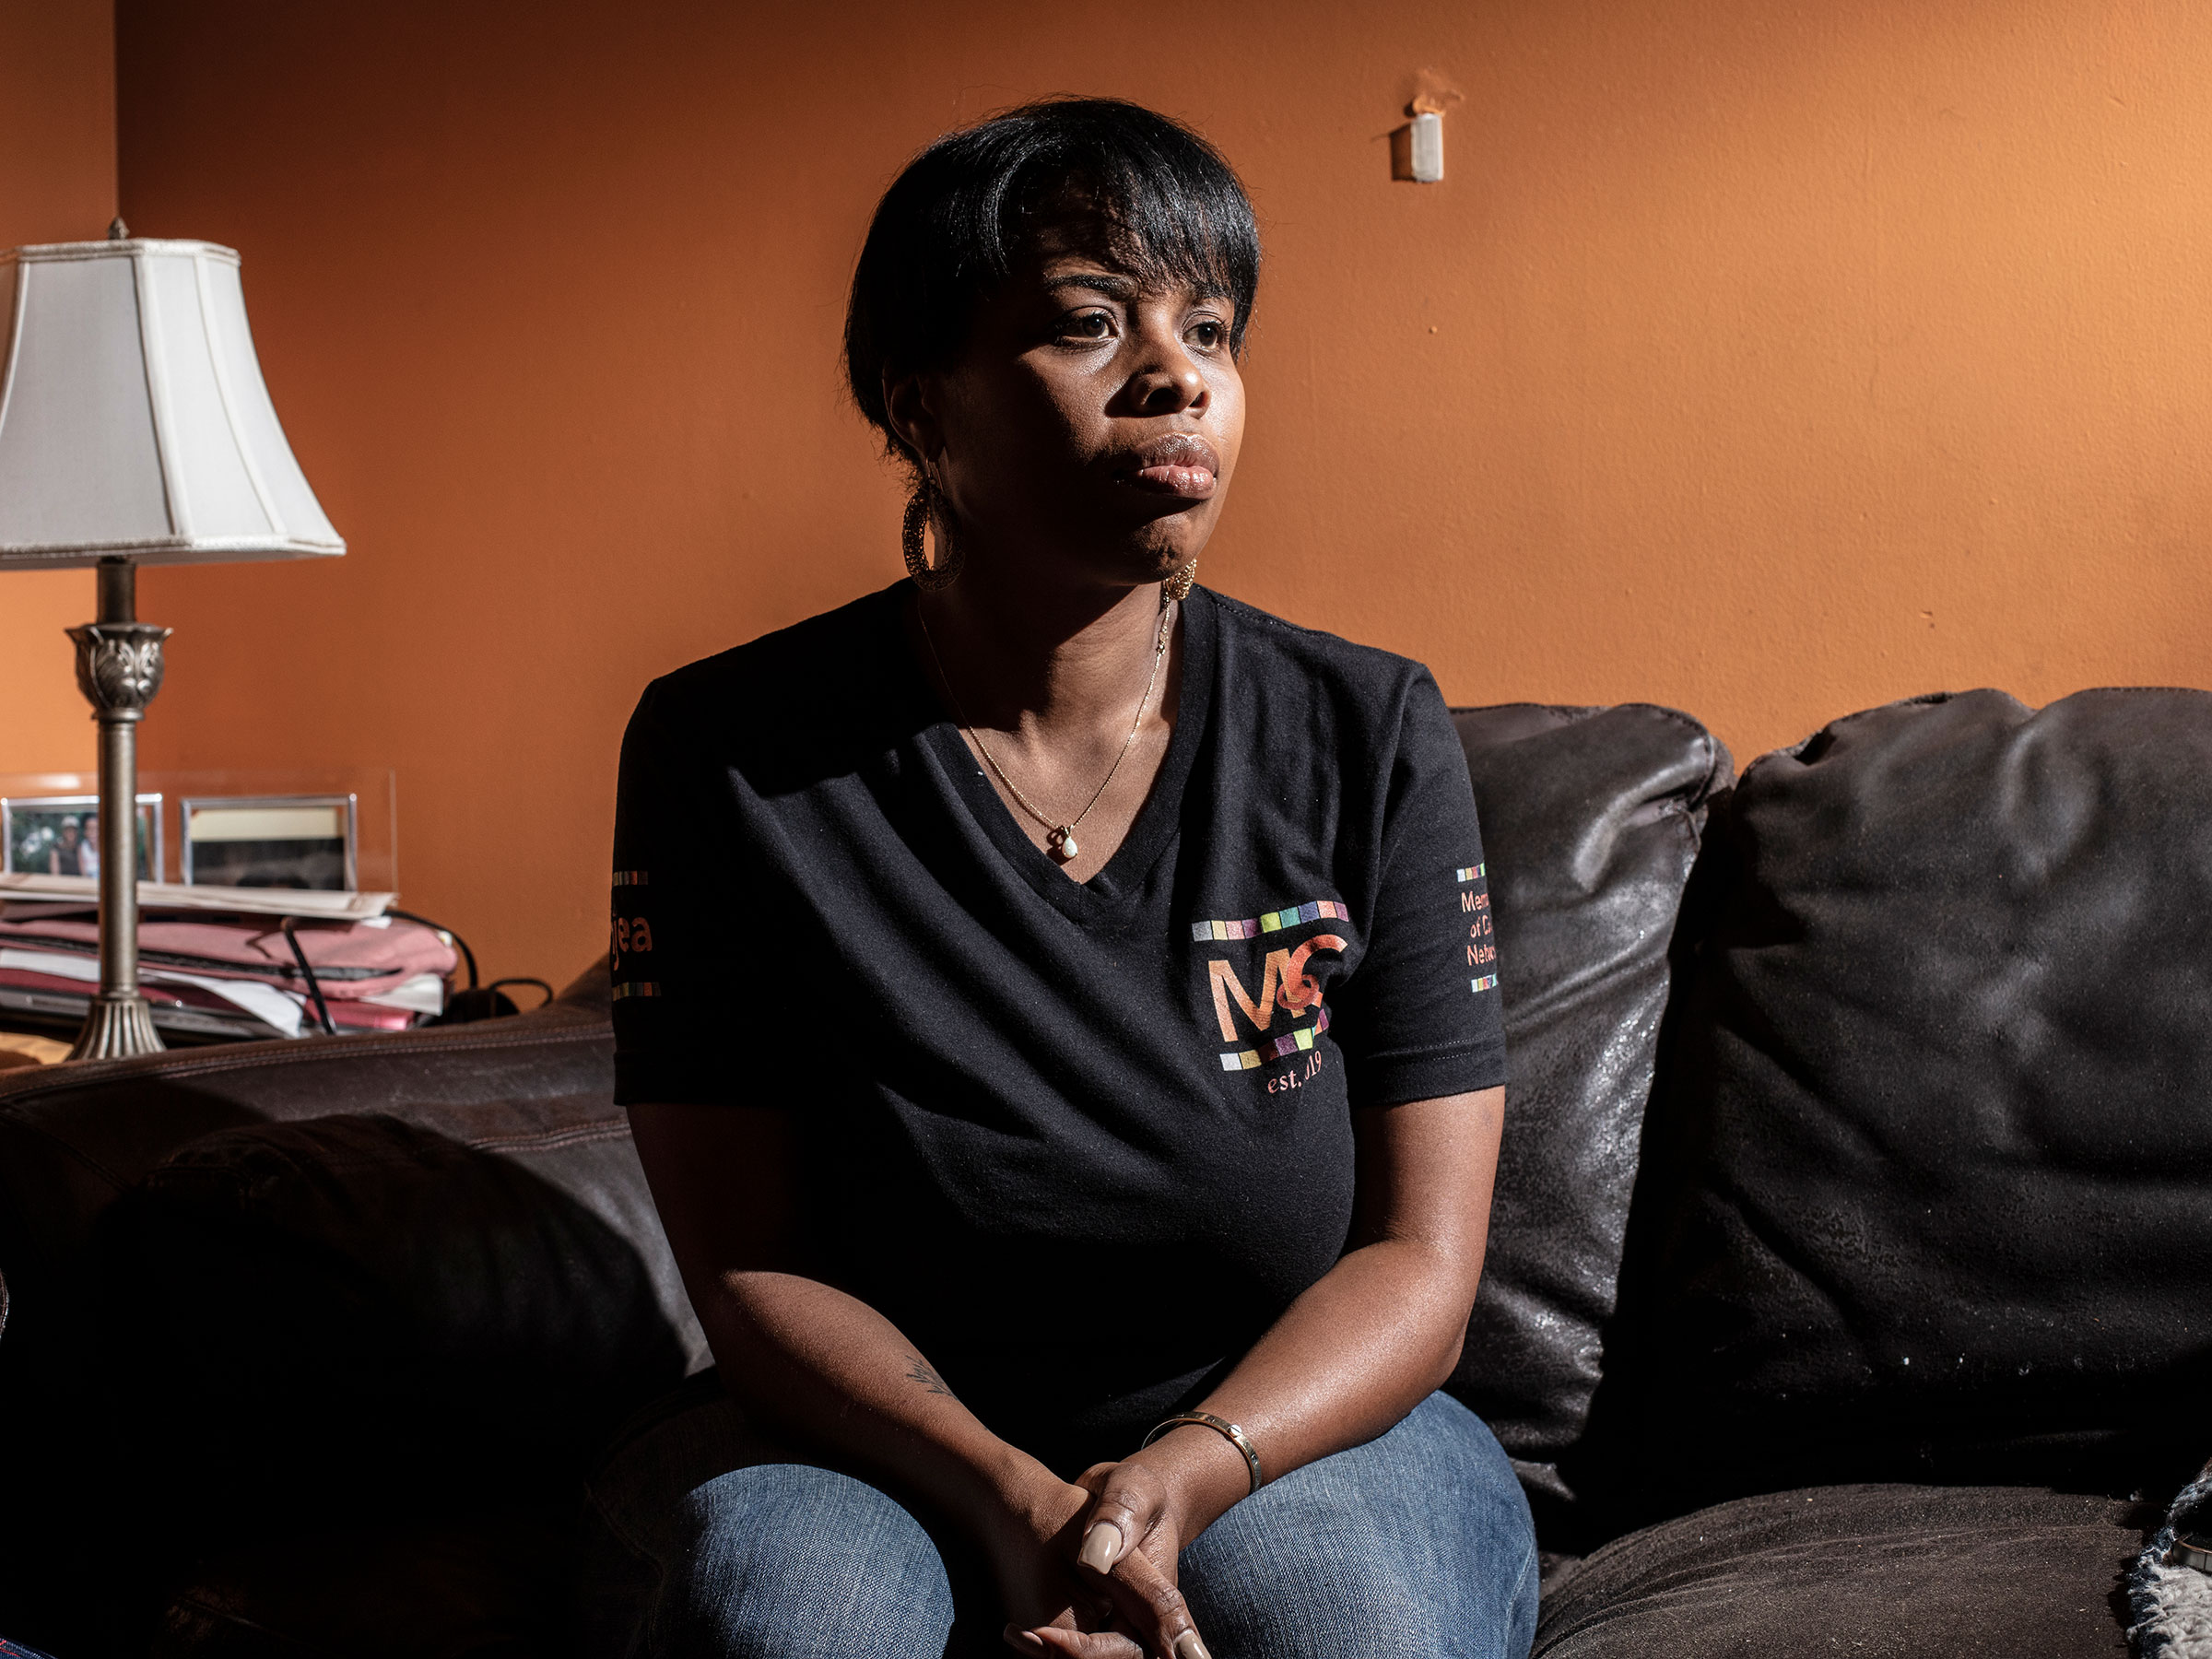 Shaye Brown in her home in Paterson, N.J., on Oct. 5. Brown resigned as a special education teacher in Paterson Public Schools for a higher salary at a neighboring district. She knows leaving will make Paterson's teacher shortage worse; her 9-year-old son's class in the district lacks a permanent teacher. (Bryan Anselm for TIME)